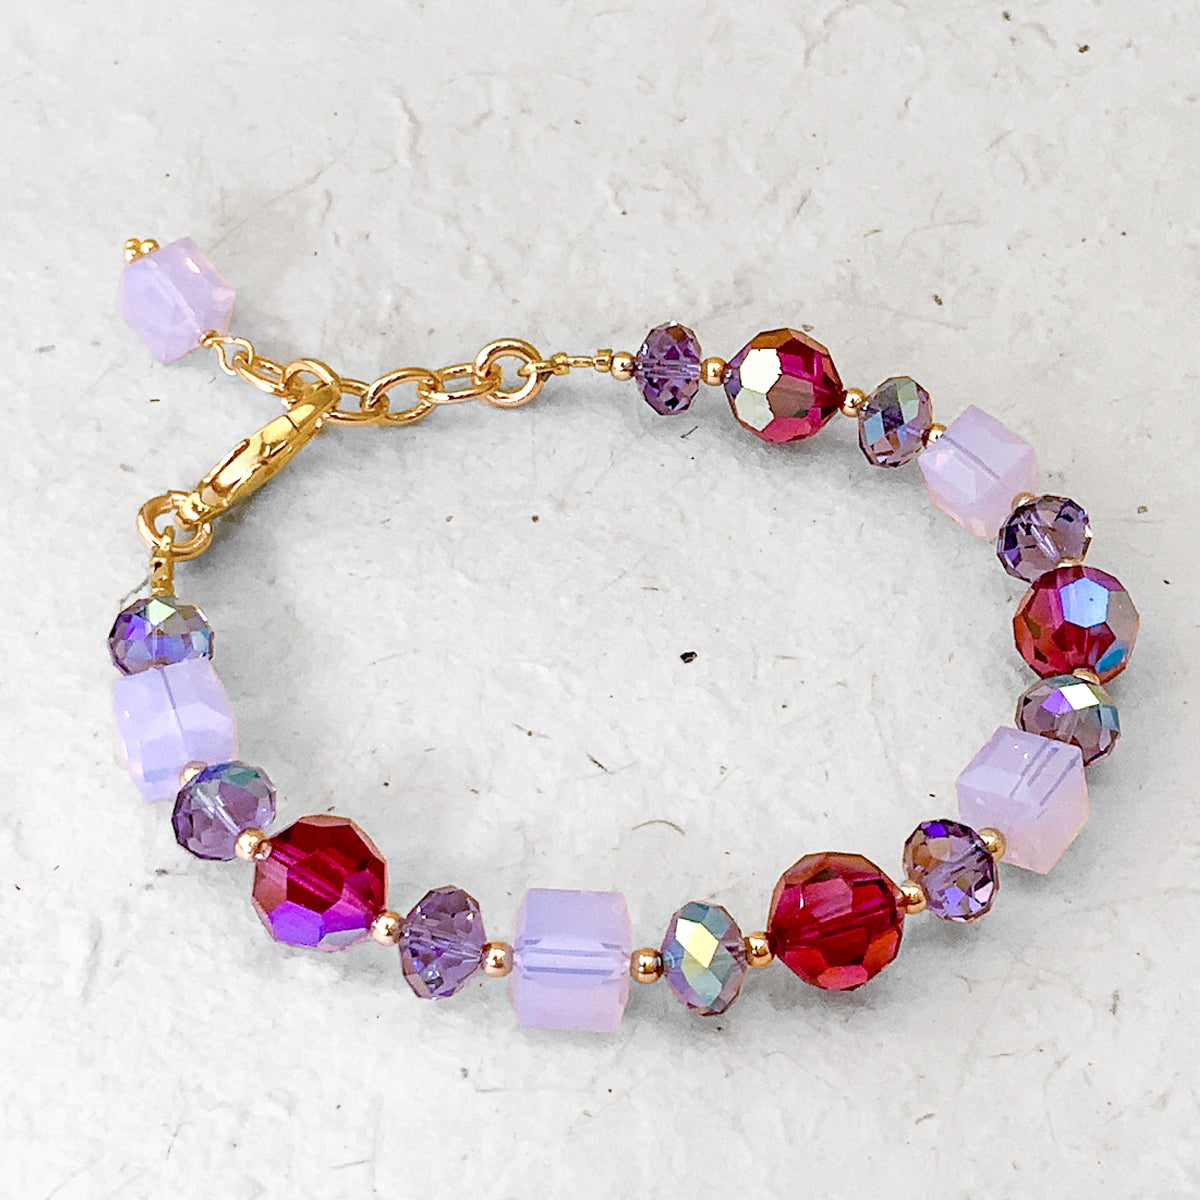 The Pomme Collection - "Berry" Bracelet